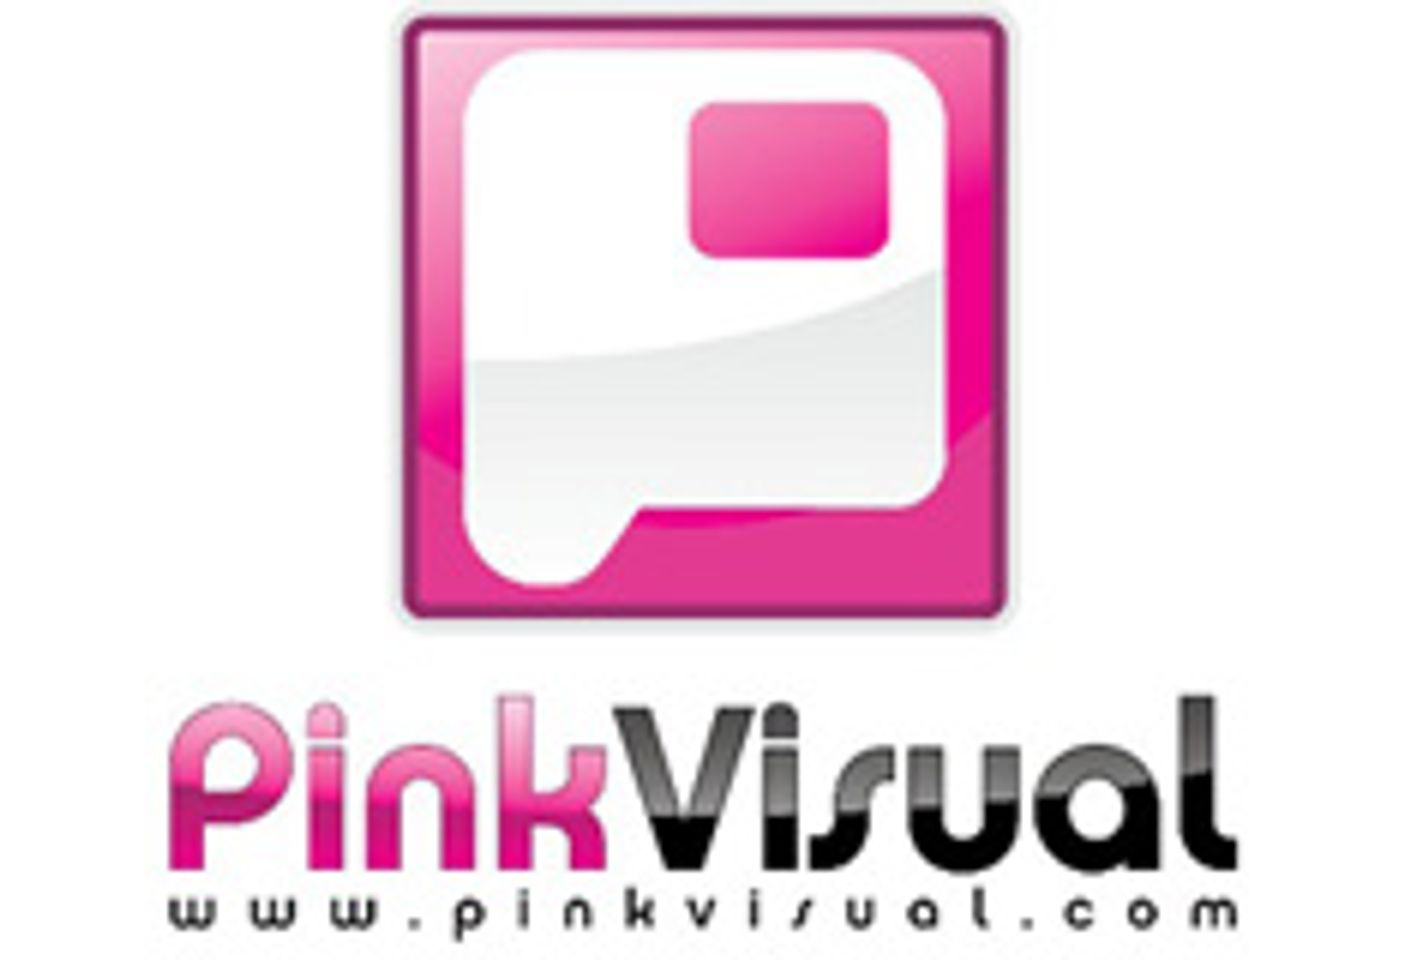 Pink Visual Offers New App for Boxee